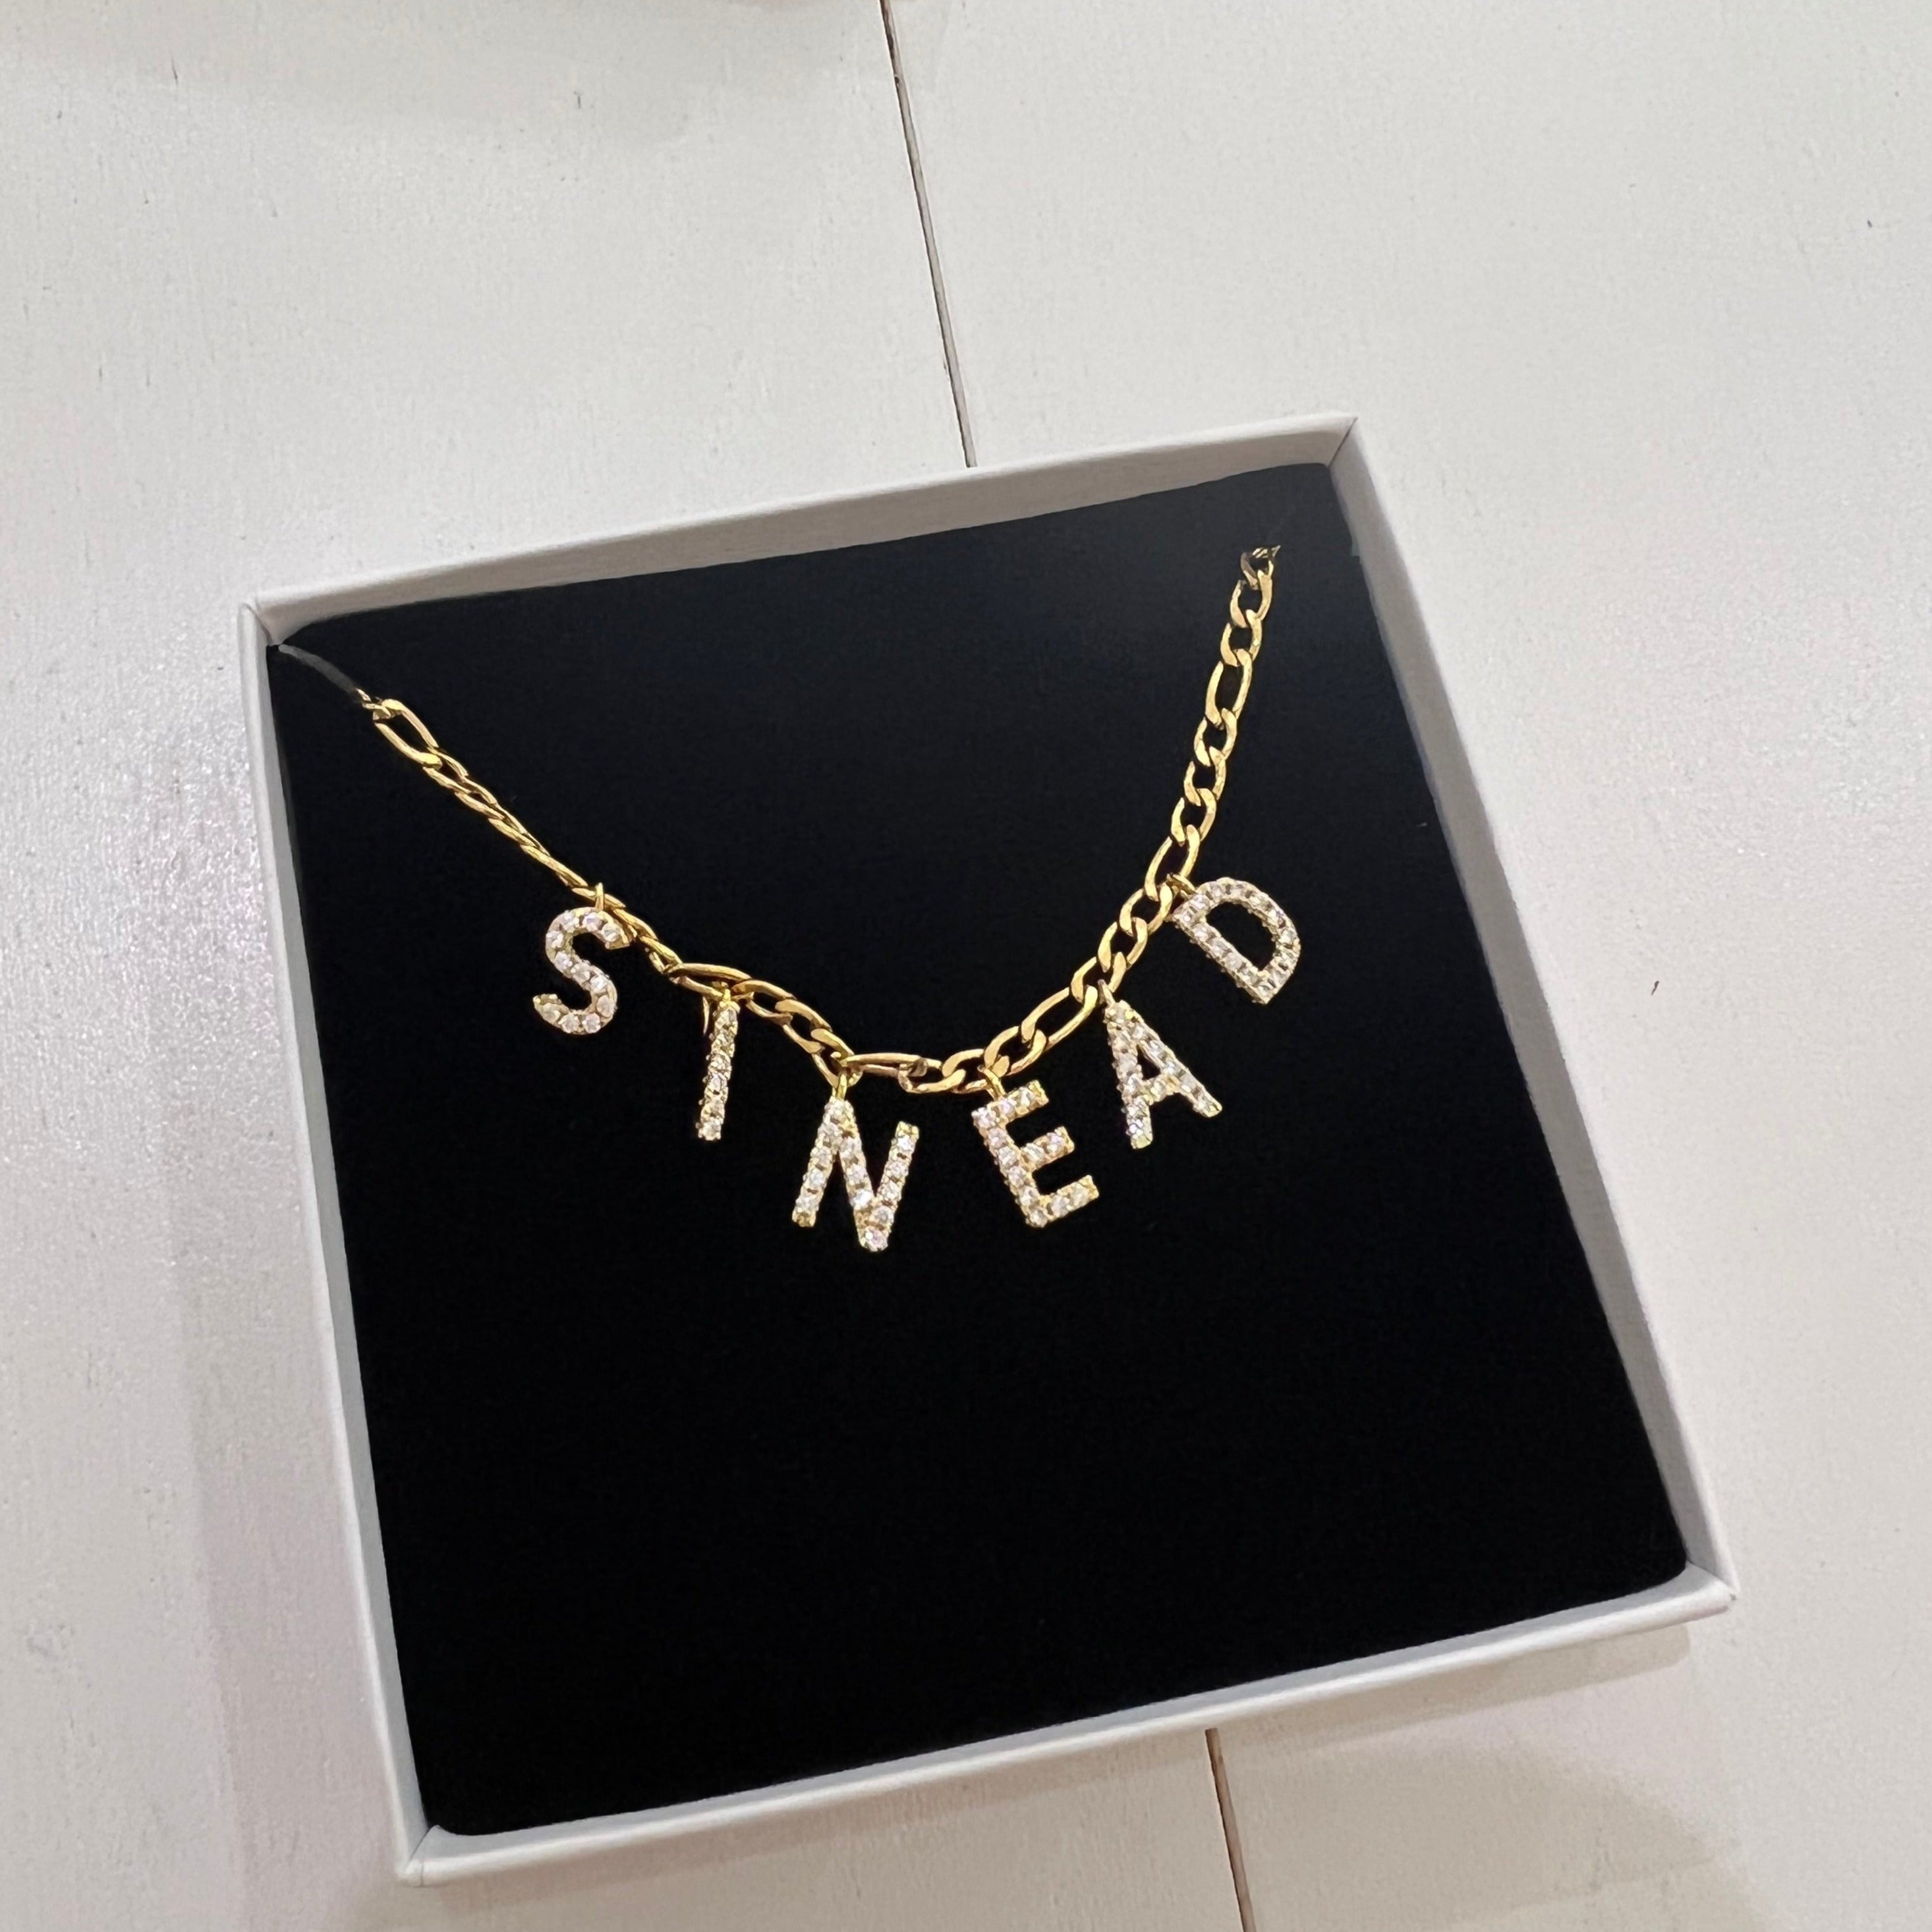 Introducing our first piece from our New Personalised Collection that has been in the making for months!  *LEAVE A NOTE AT CHECKOUT WITH THE PERSONALISED NAME YOU WANT ON THE NECKLACE*  High Quality Stainless Steel Cubic Zirconia Pendant Necklace.  1-4 Letters- €31.99  5-7 Letters- €34.99  8+ Letters- €37.99